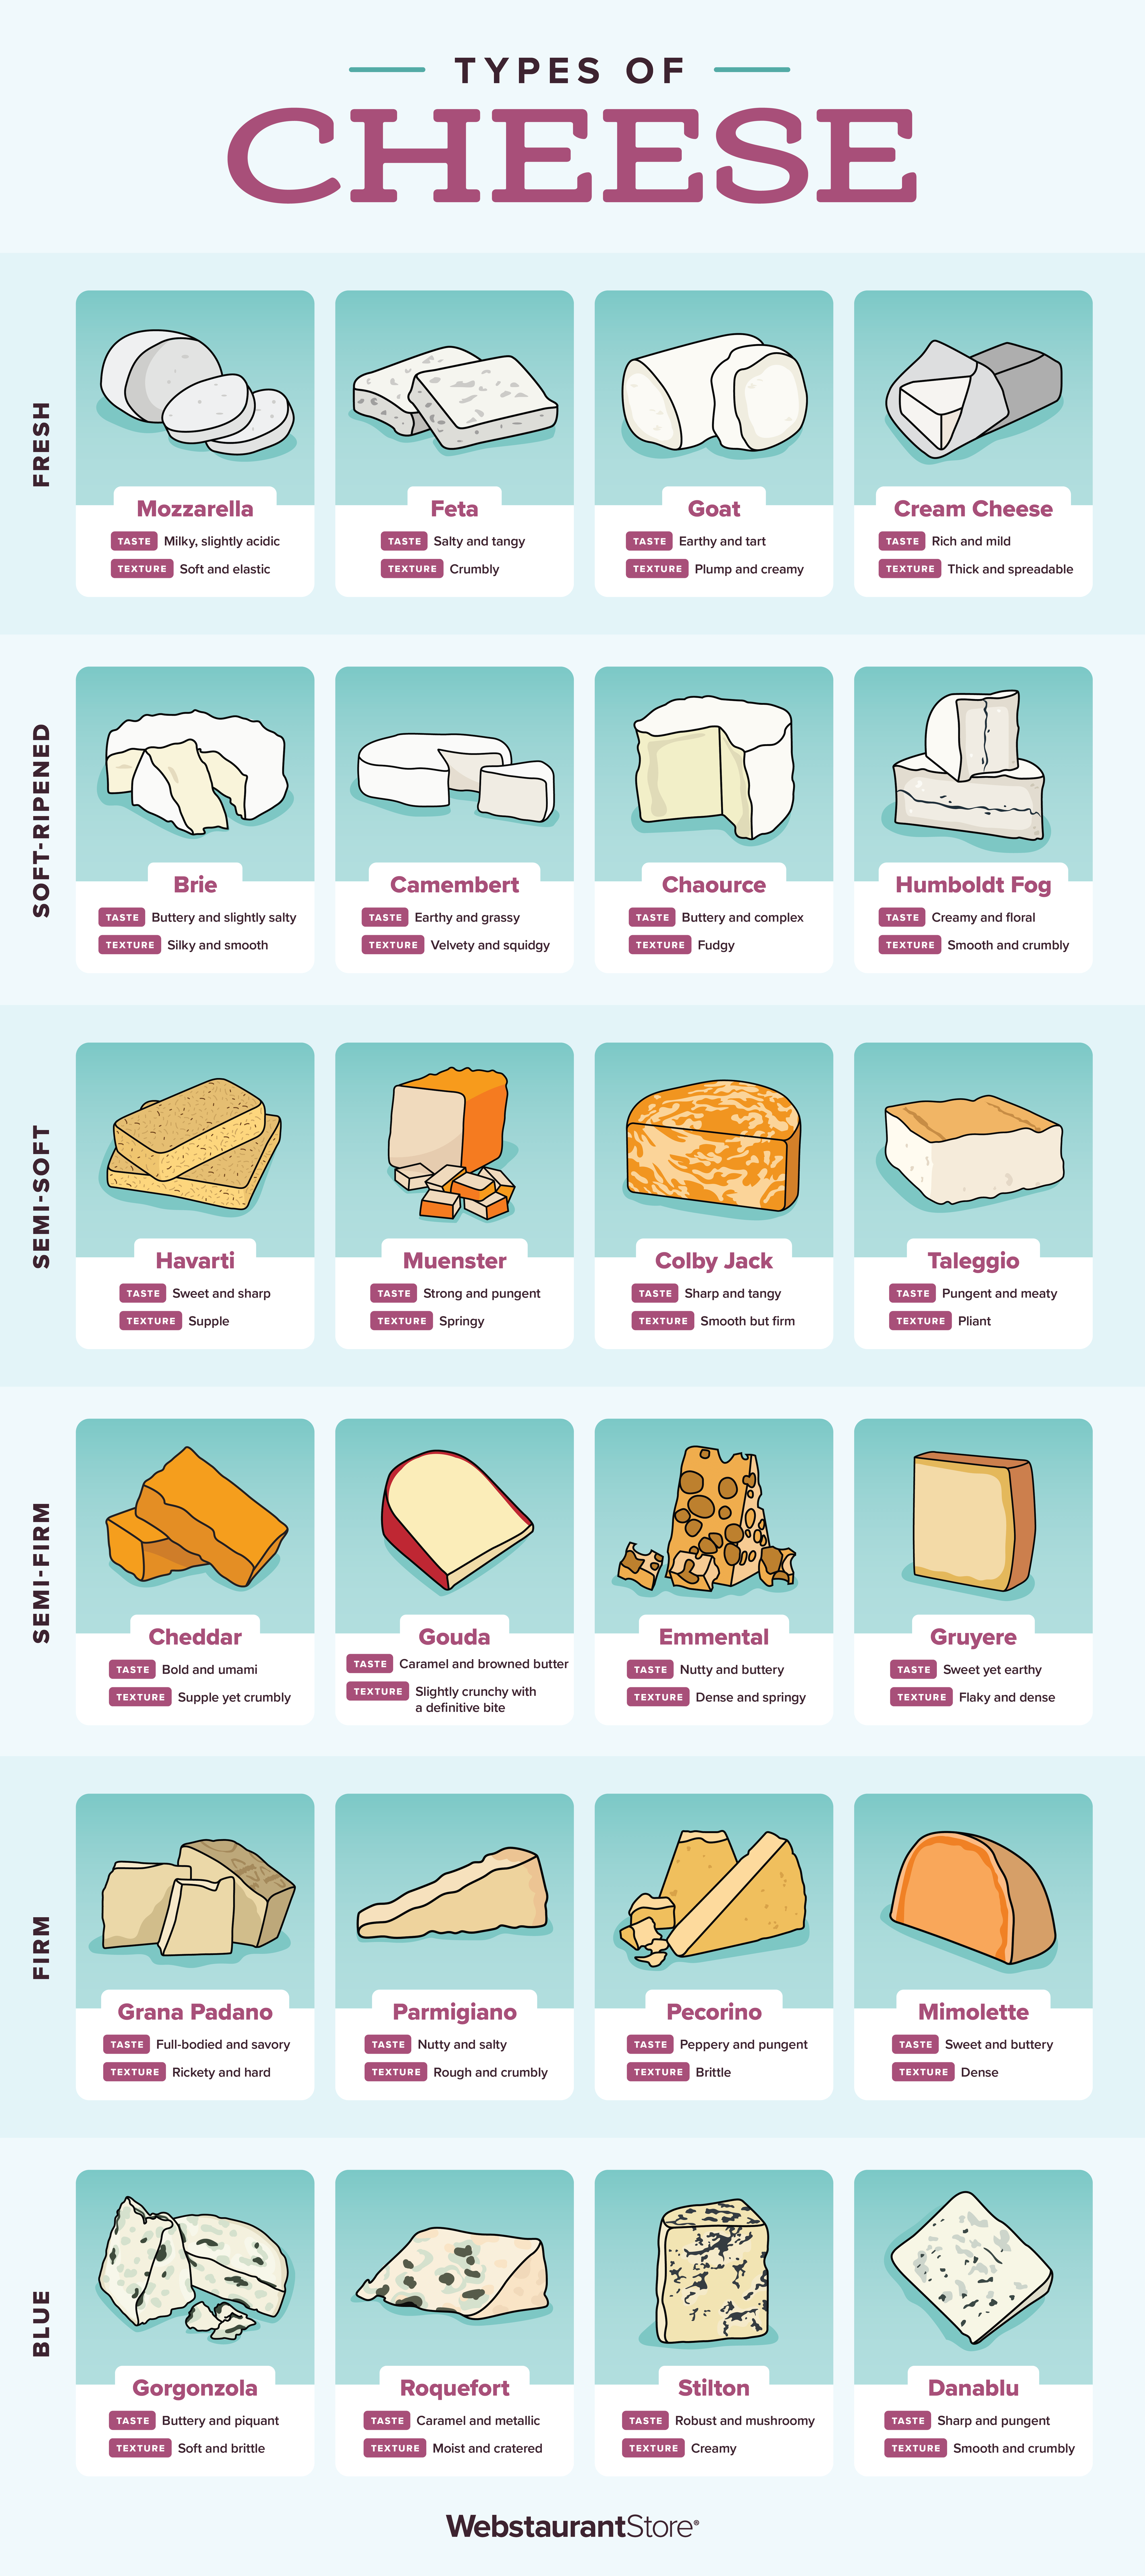 Types of Cheese Infographic